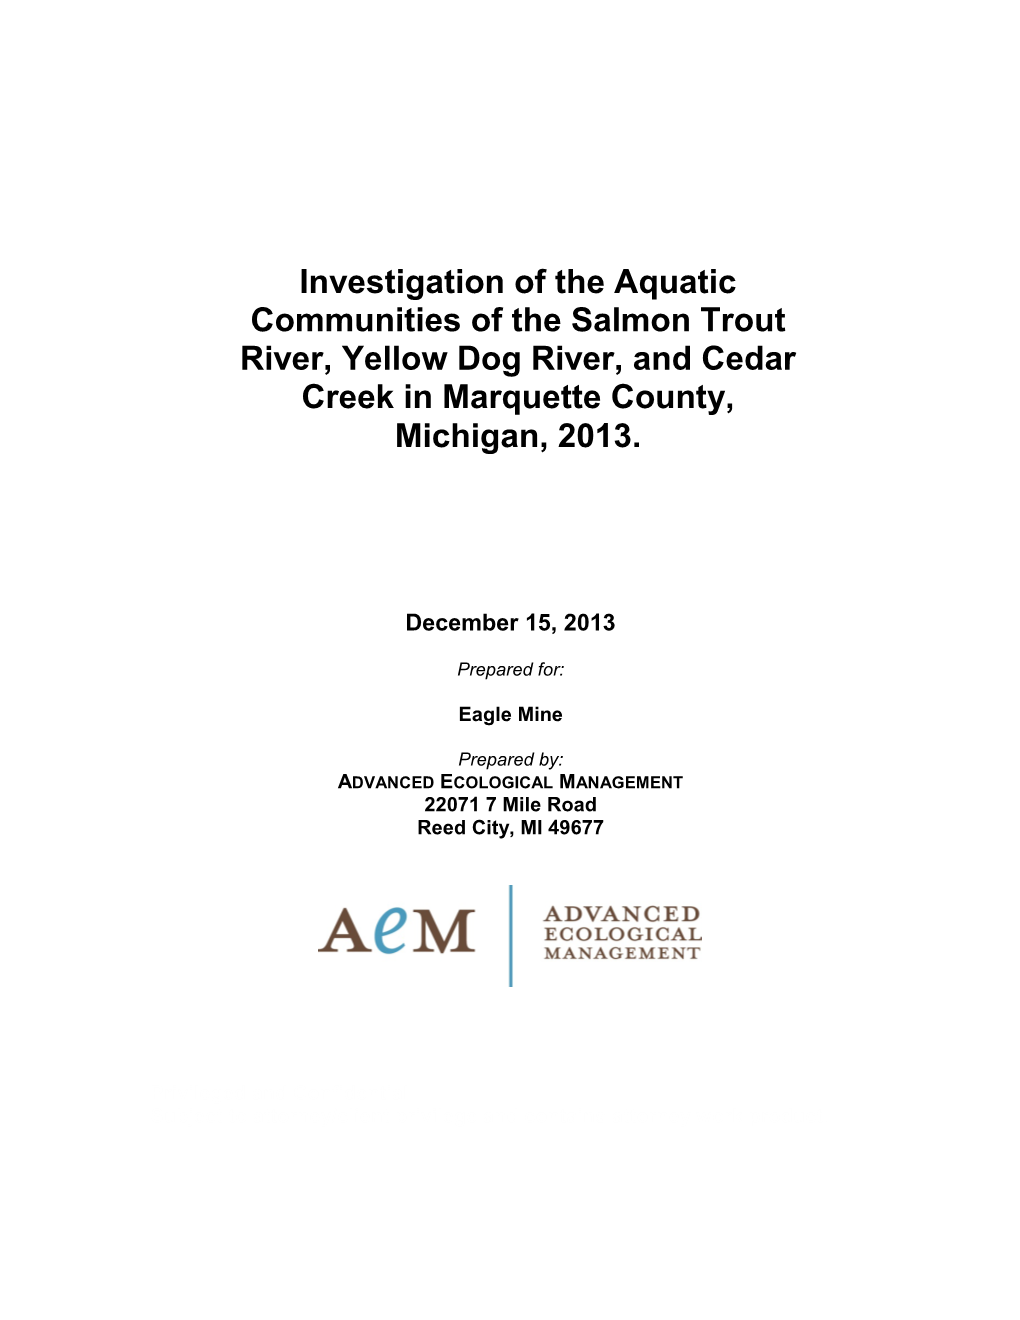 Investigation of the Aquatic Communities of the Salmon Trout